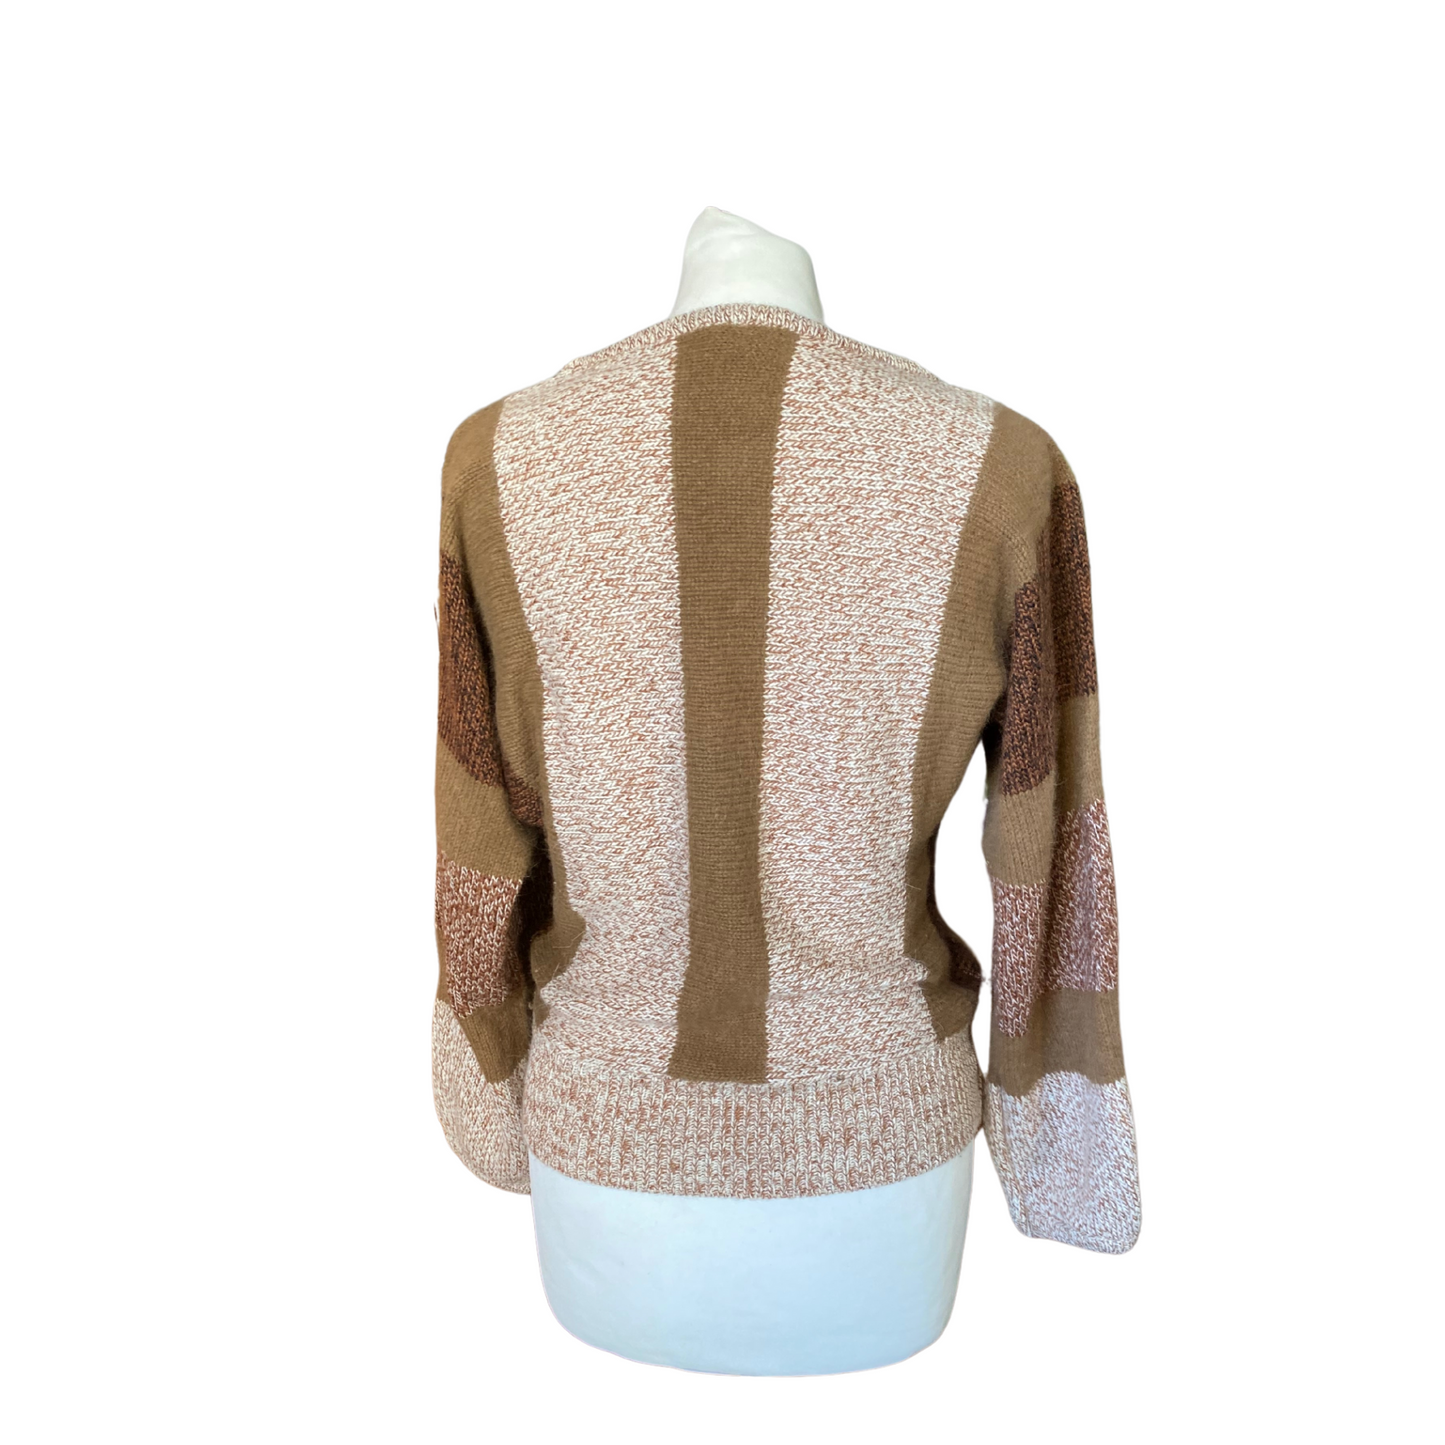 80s camel, white and brown fluffy knit jumper Approx  Uk size 10-12